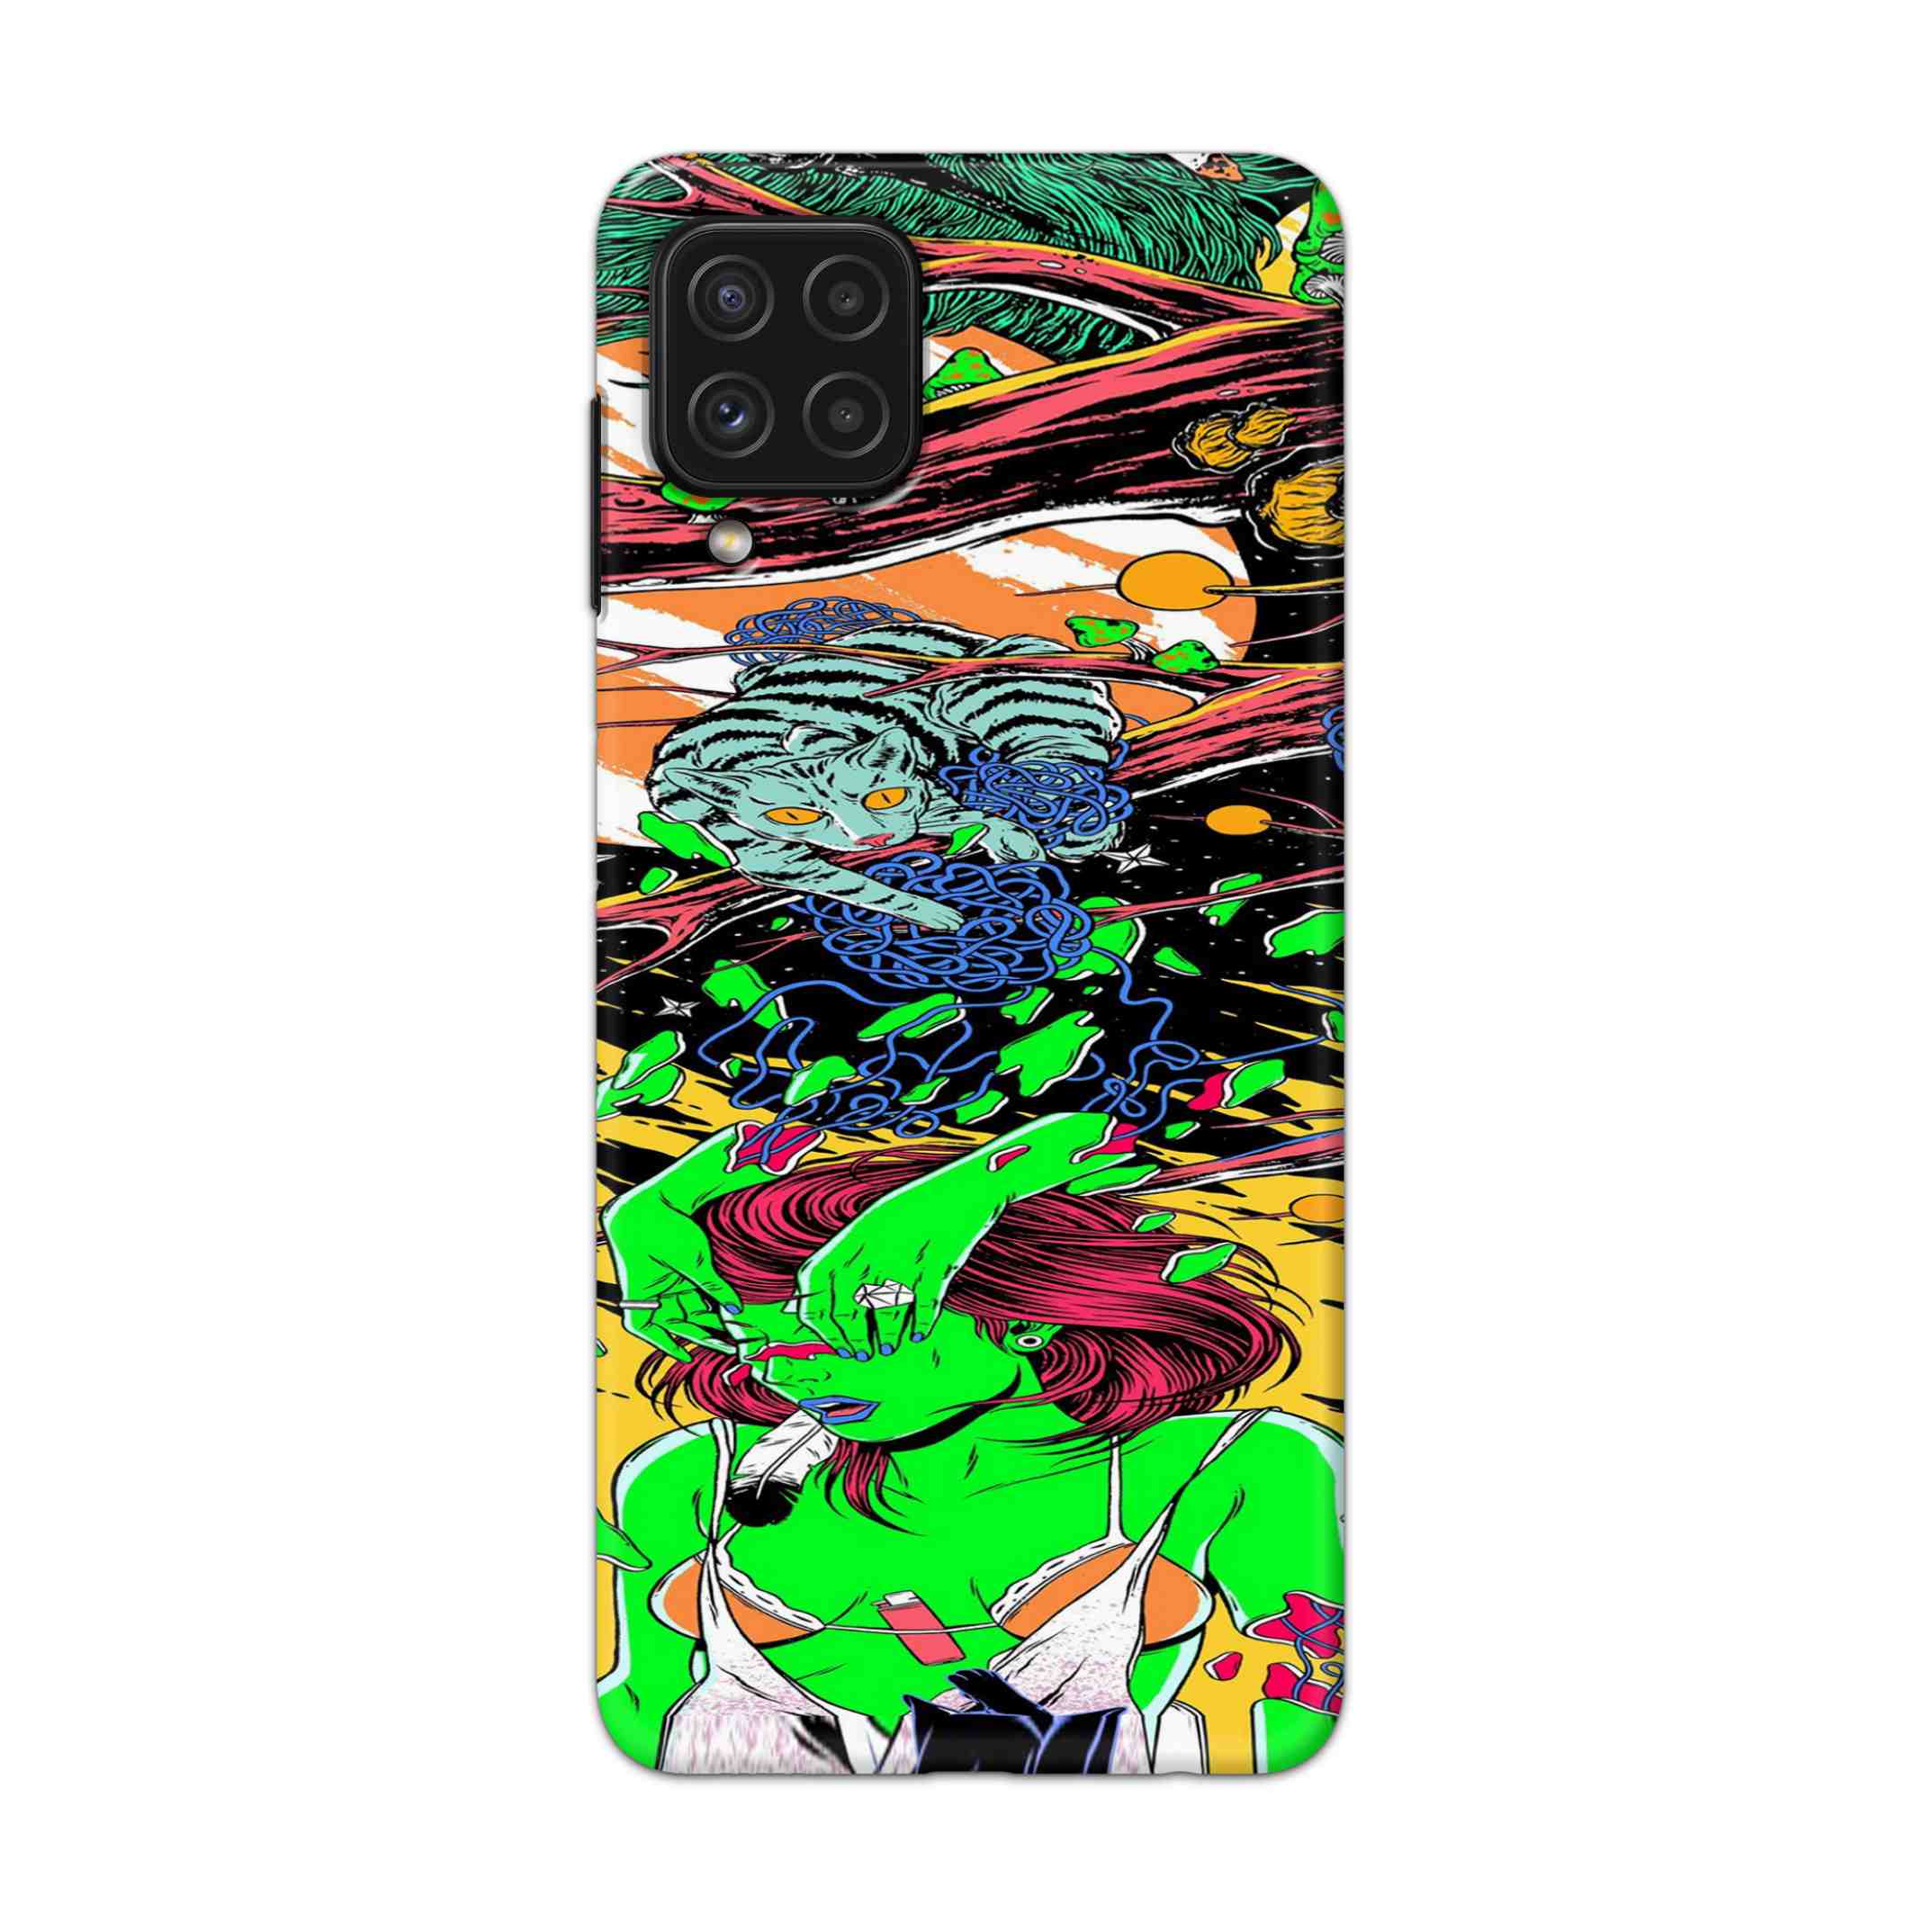 Buy Green Girl Art Hard Back Mobile Phone Case Cover For Samsung Galaxy A22 Online